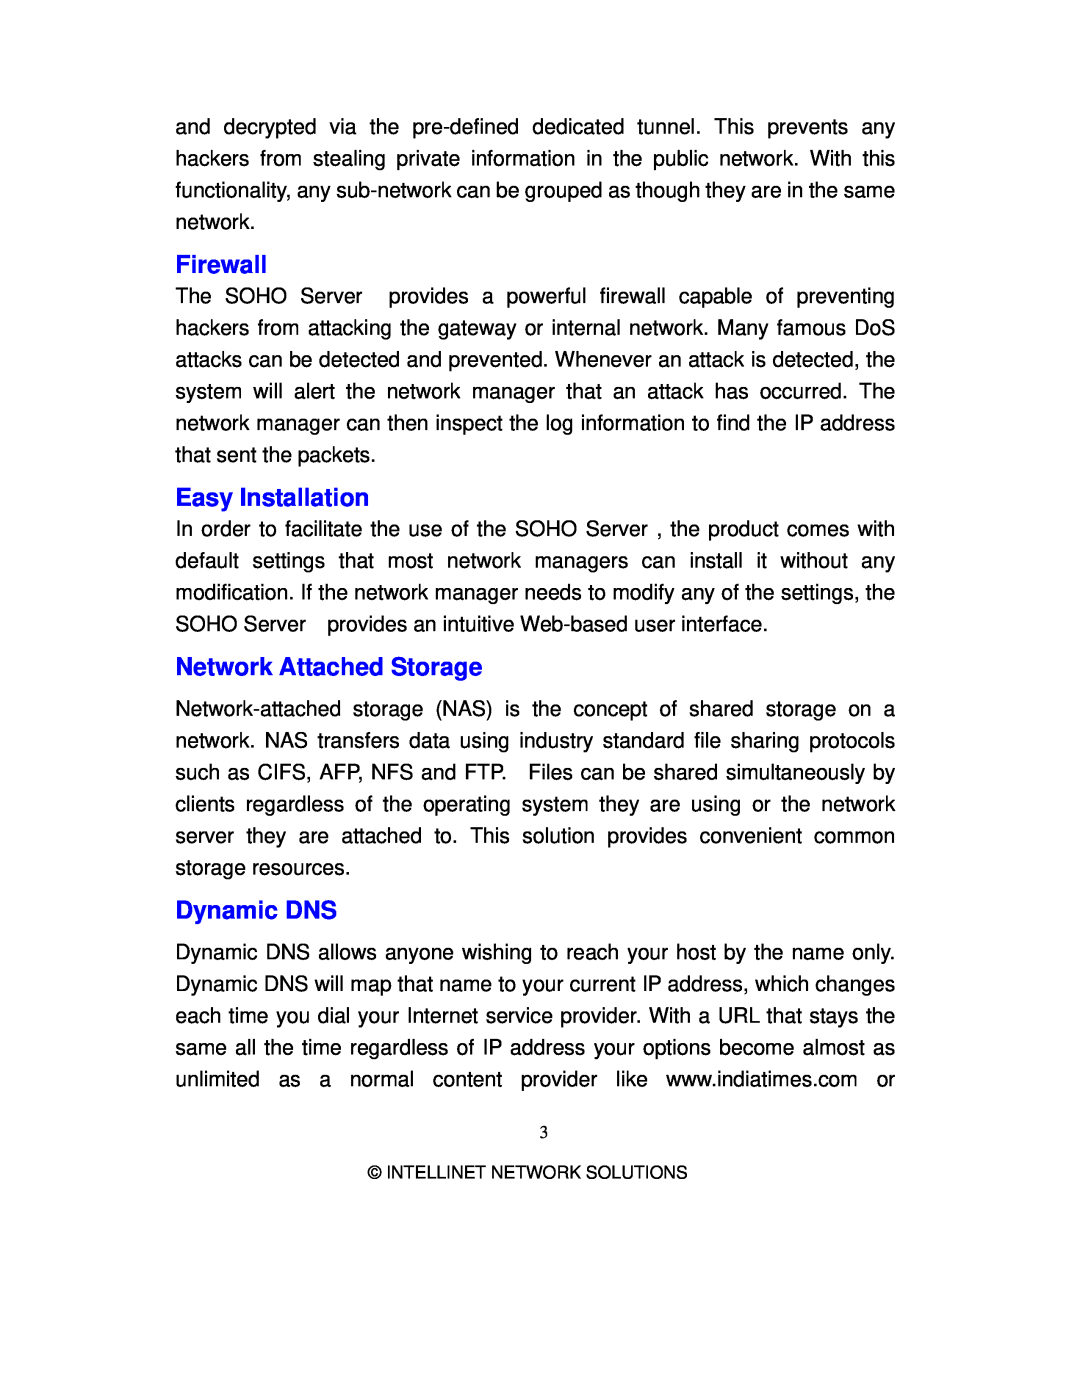 Intellinet Network Solutions 501705 manual Easy Installation, Network Attached Storage, Dynamic DNS, Firewall 